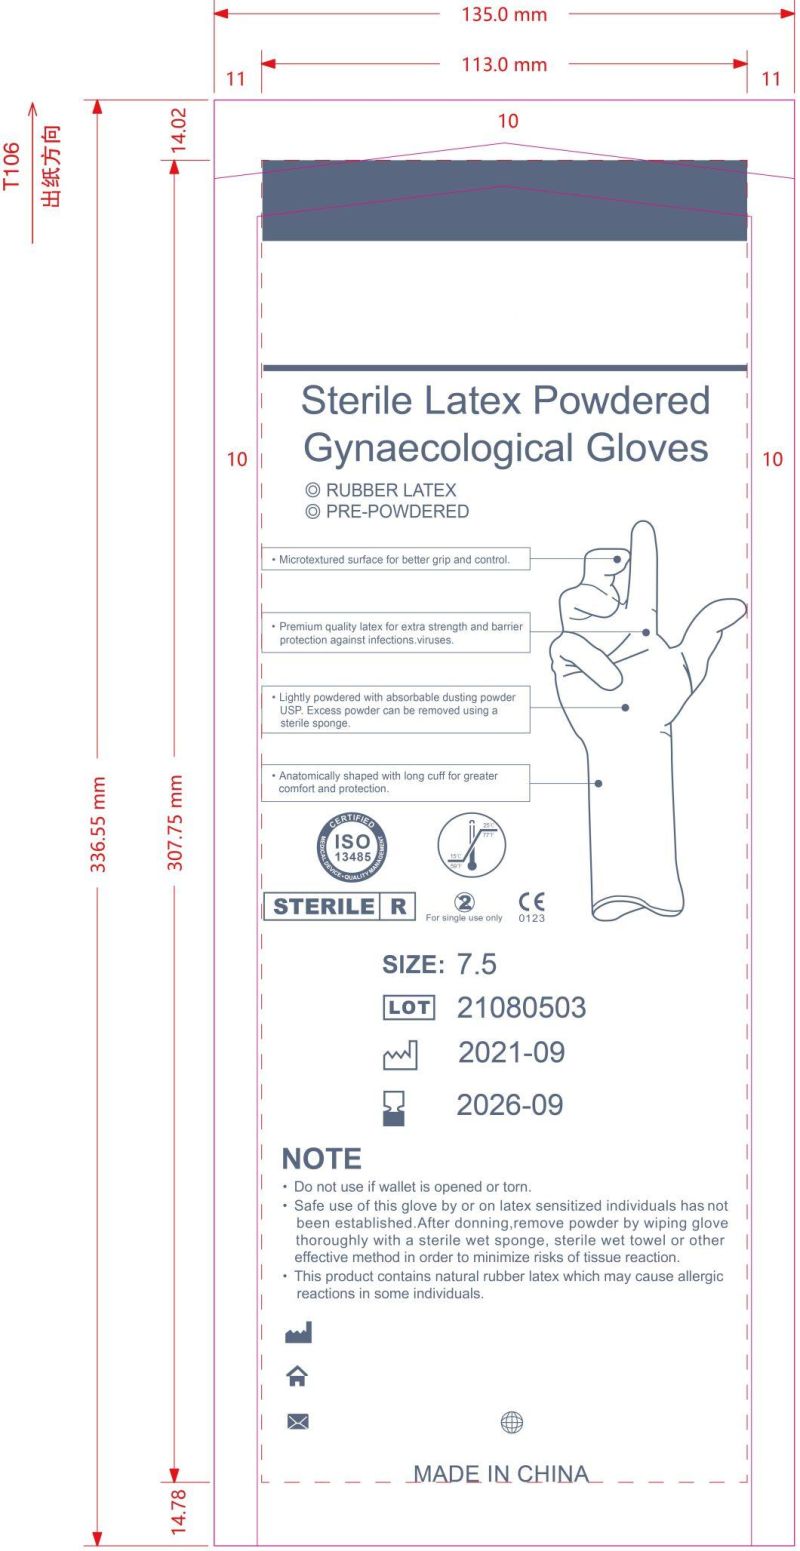 Sterile Long Surgical Latex Gynecologic Gloves Indonesia Latex Gloves Latex Powder Free Beautiful Hand in Dubai Cheap Mittens